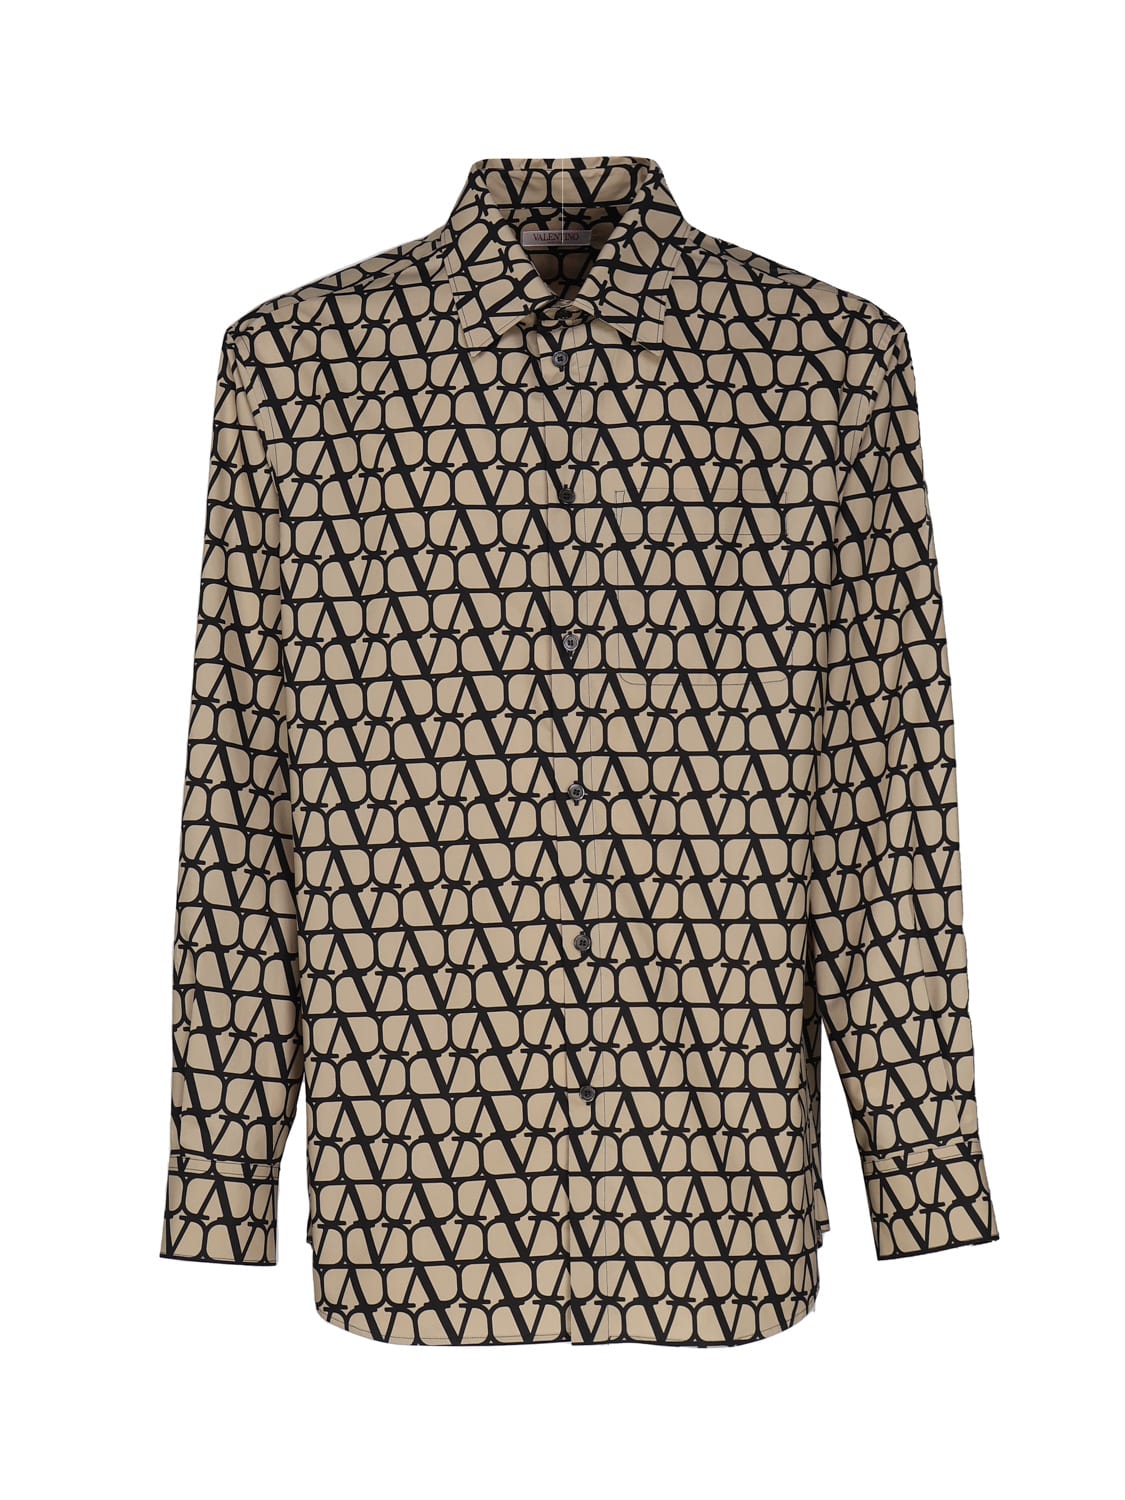 VALENTINO LONG-SLEEVED SHIRT IN COTTON WITH ALL-OVER TOILE ICONOGRAPHE PRINT